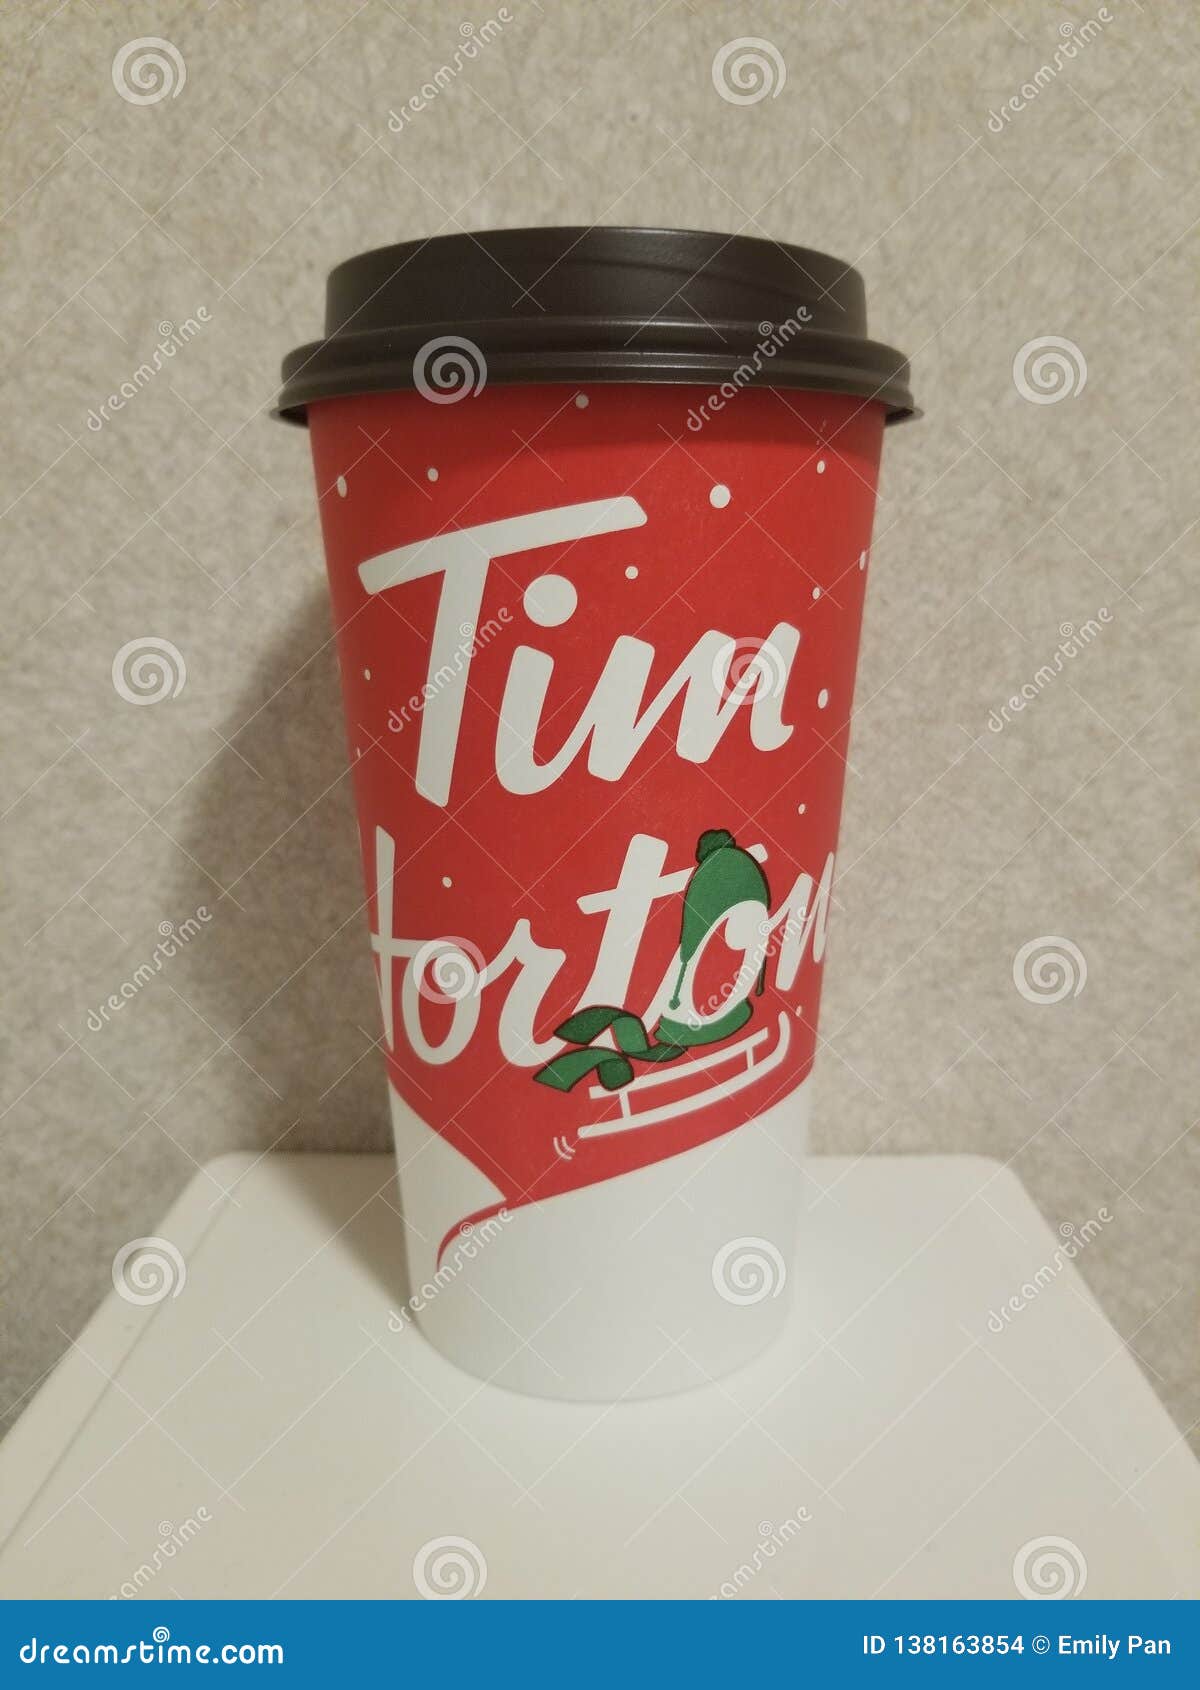 Tim Hortons Cup Editorial Stock Image Image Of Chocolate